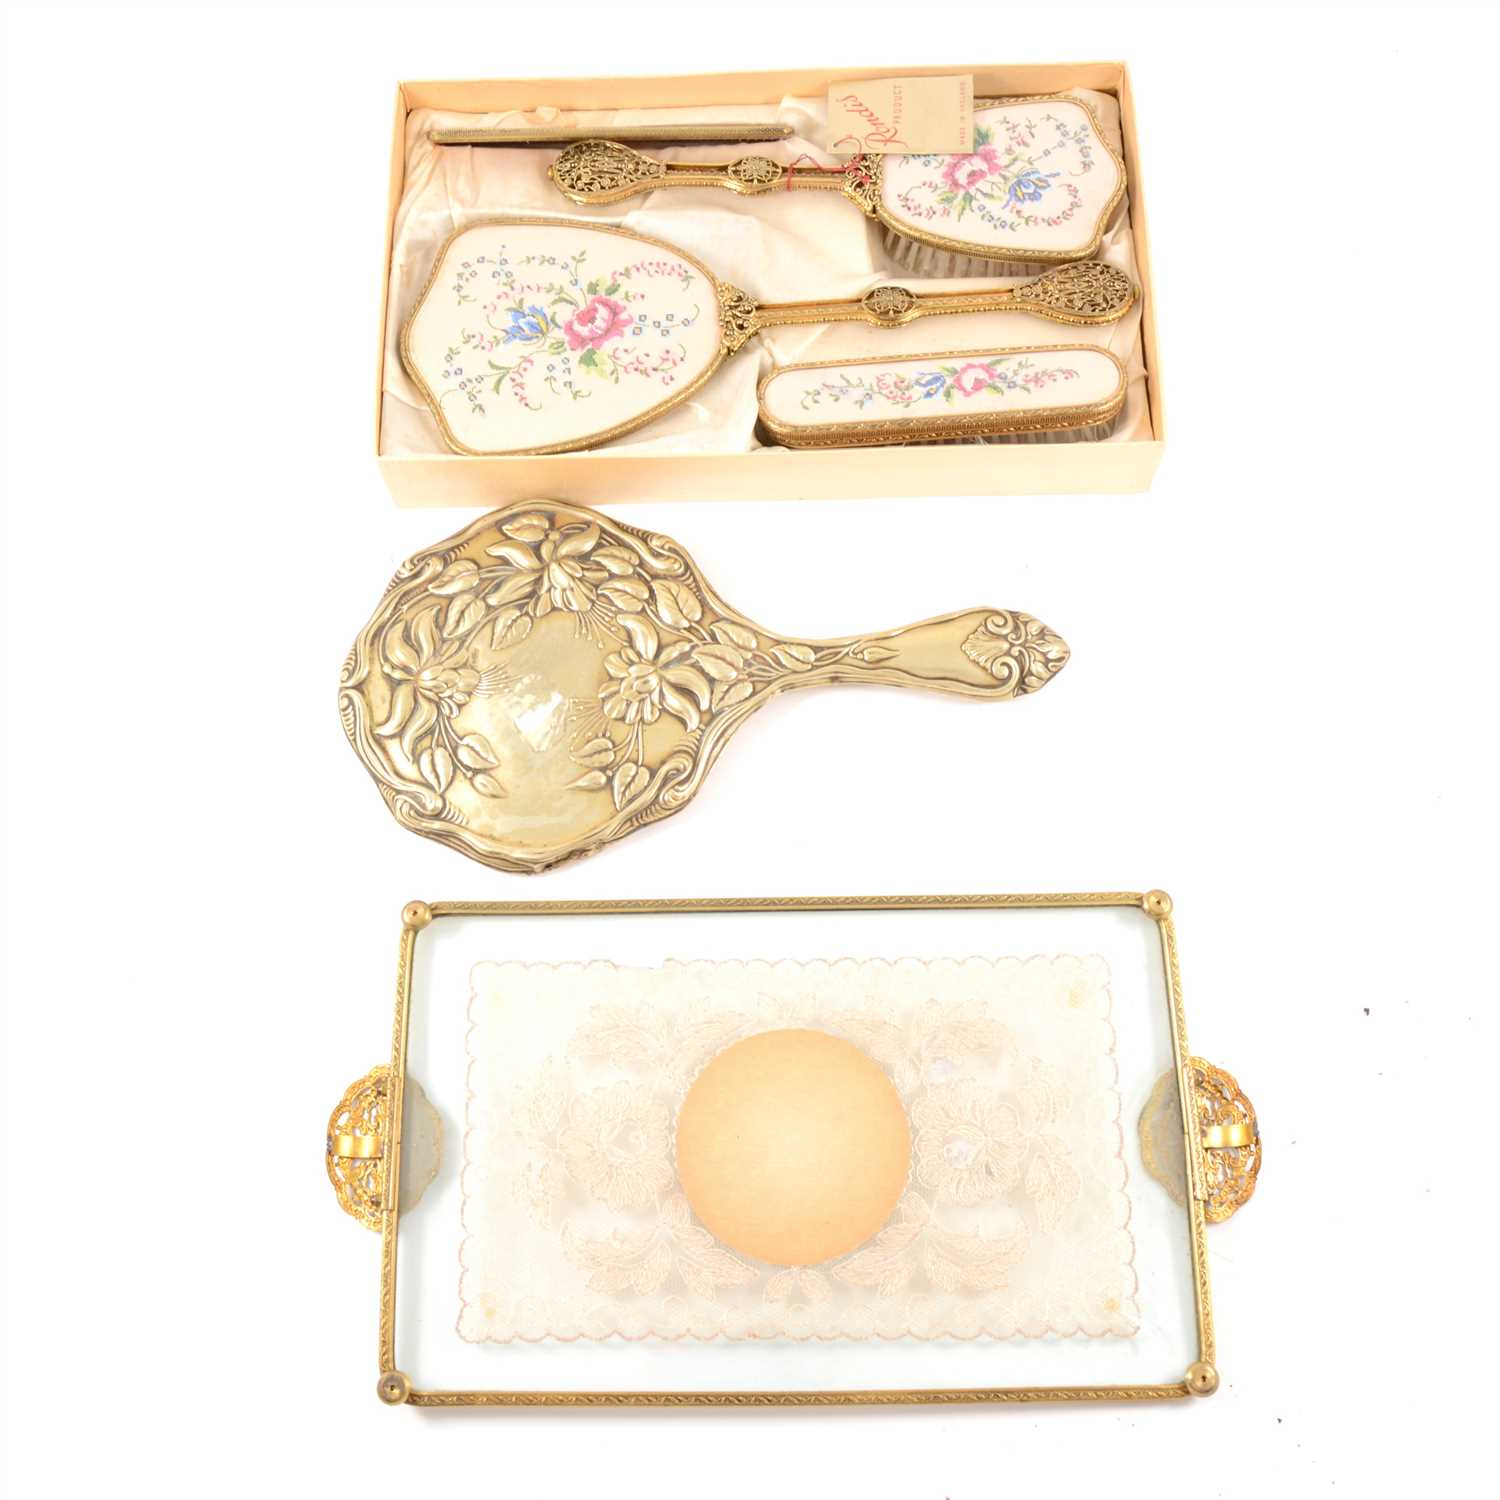 Lot 113 - A boxed dressing table set by Rondis, comprising a hair brush, hand brush, comb, mirror with floral design and filigree handles, a matching tray, a hand mirror with fuchsia design, and a tapestry